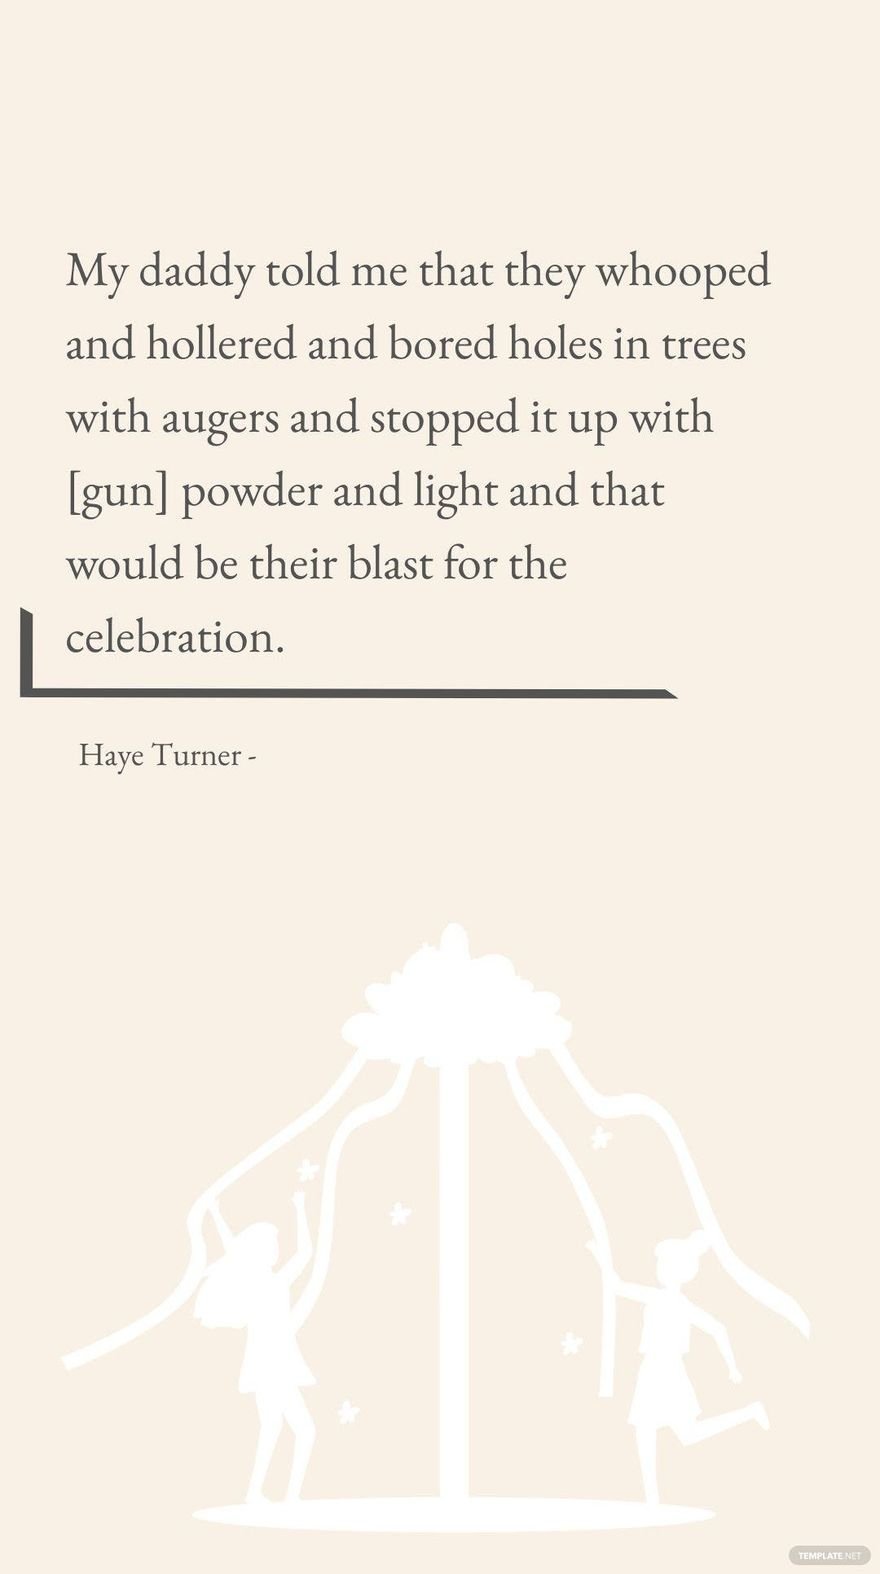 Haye Turner - My daddy told me that they whooped and hollered and bored holes in trees with augers and stopped it up with [gun] powder and light and that would be their blast for the celebration.